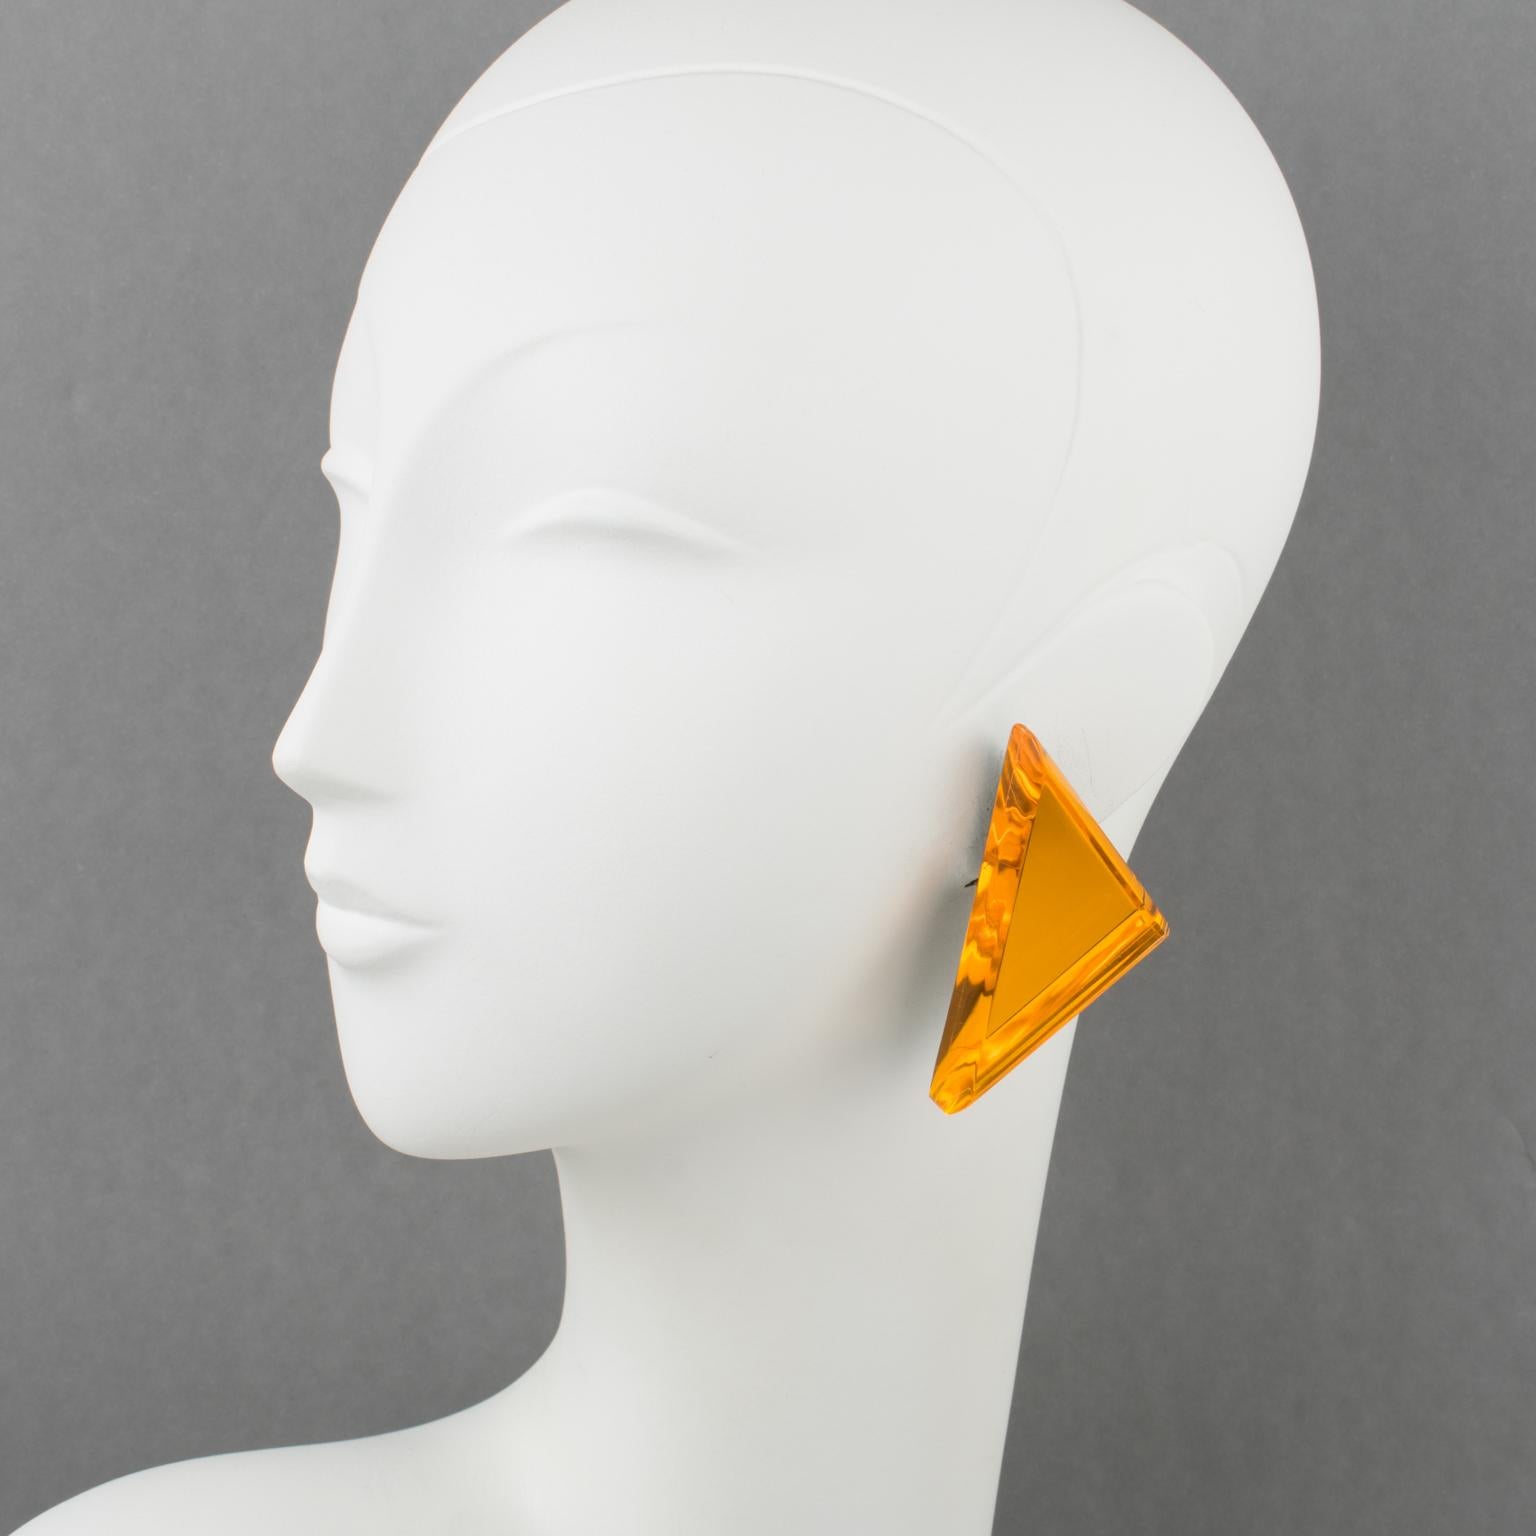 Beautiful oversized Lucite clip-on earrings designed by Harriet Bauknight for Kaso. A geometric triangle shape features a dimensional layer with a neon orange mirror-textured pattern and large beveling. The Kaso brand paper sticker was removed, but